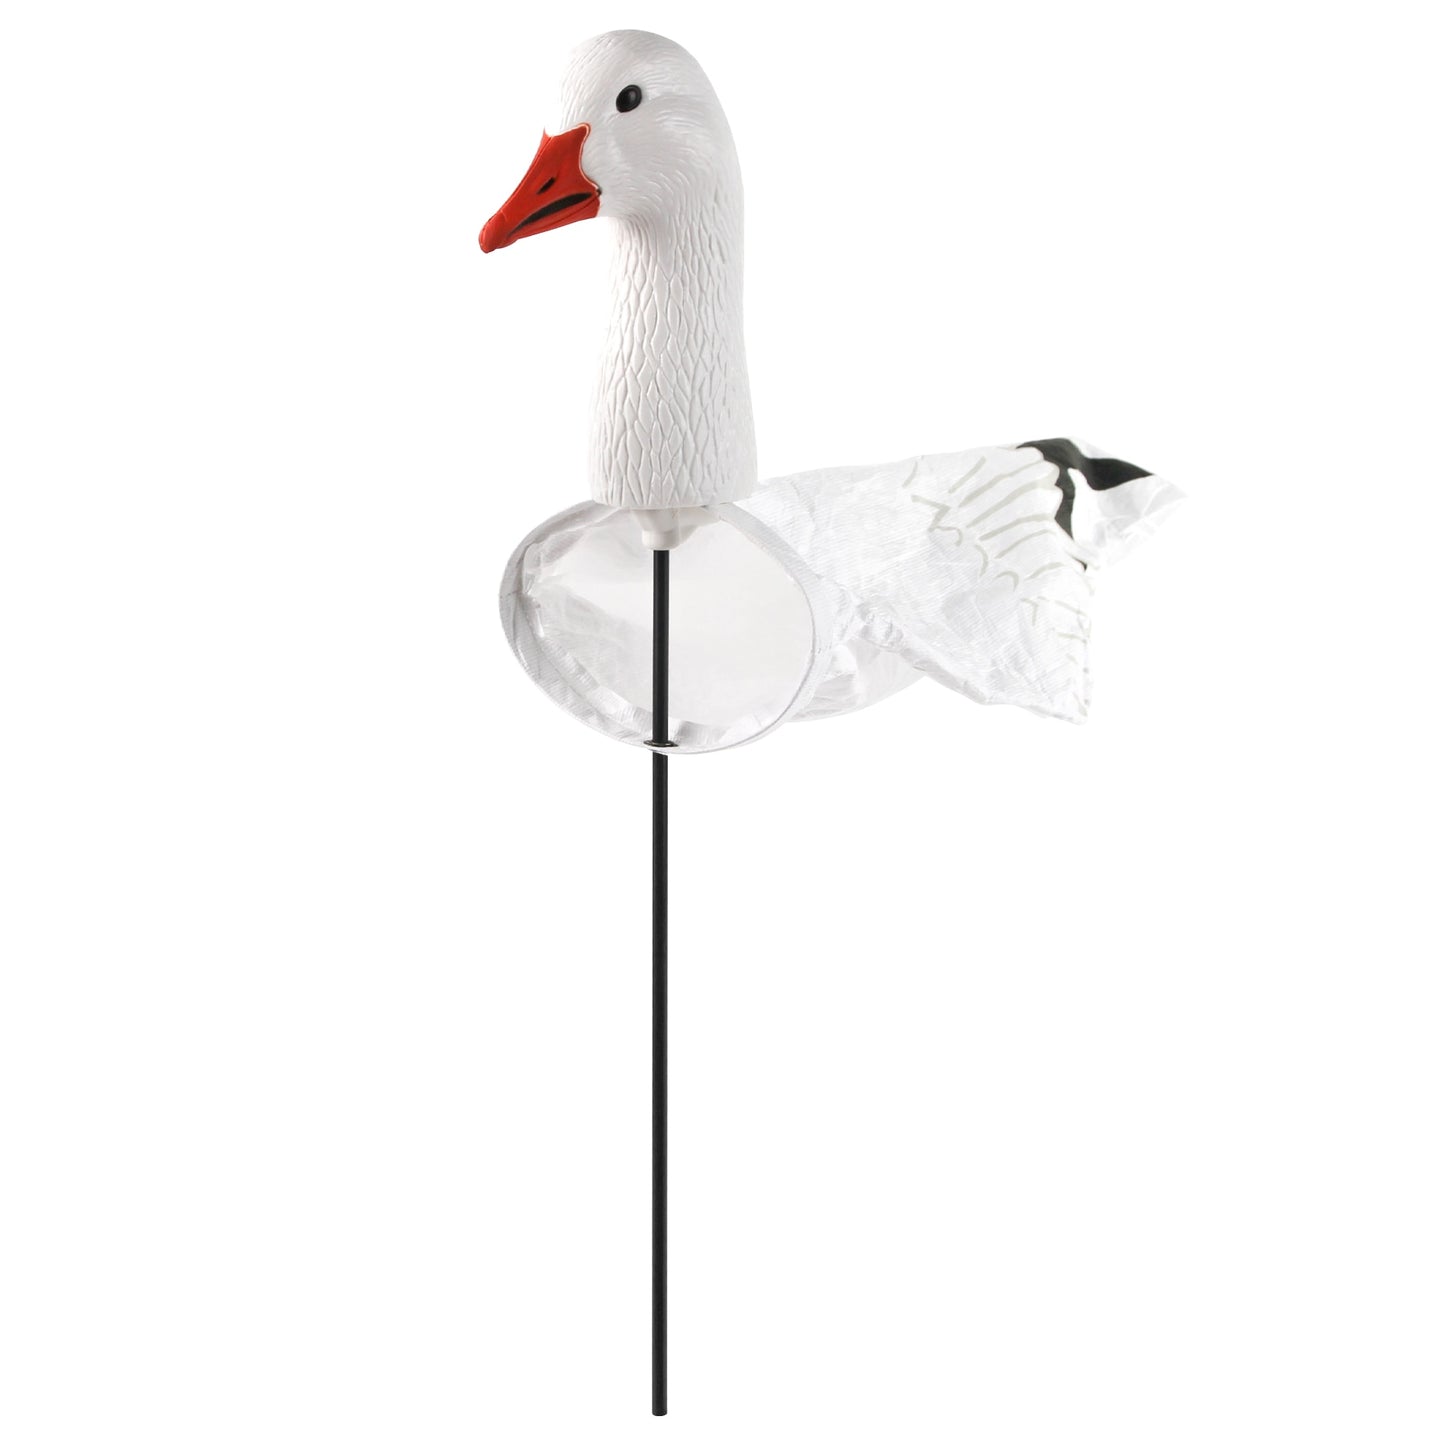 GUGULUZA Hunting Decoy Wind Goose Tyvek EVA Plastic Windsock   Geese decoys for Outdoor Hunting Garden Decoration White Wing